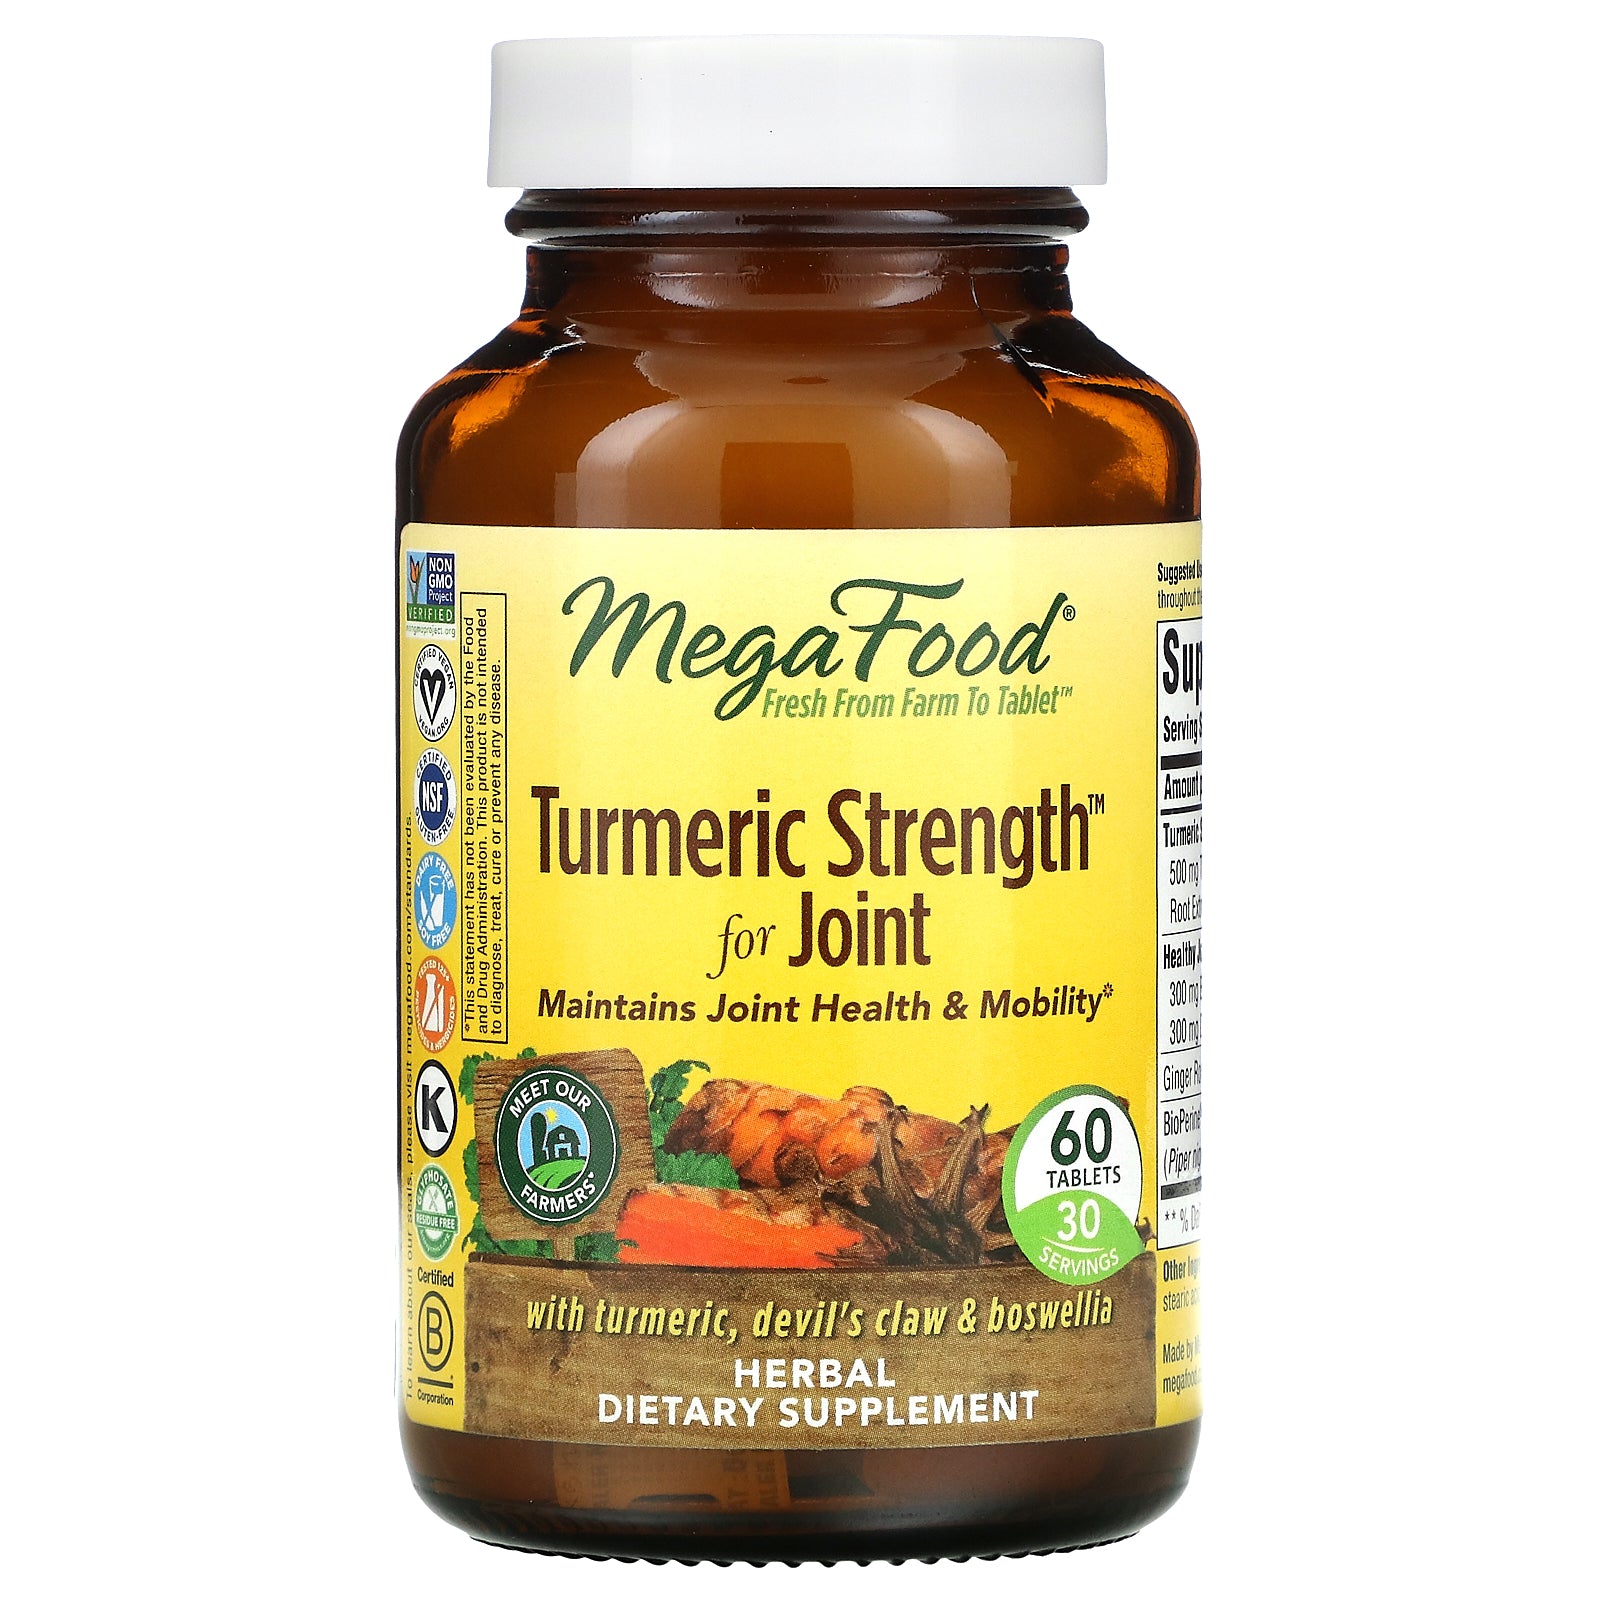 MegaFood, Turmeric Strength for Joint Tablets